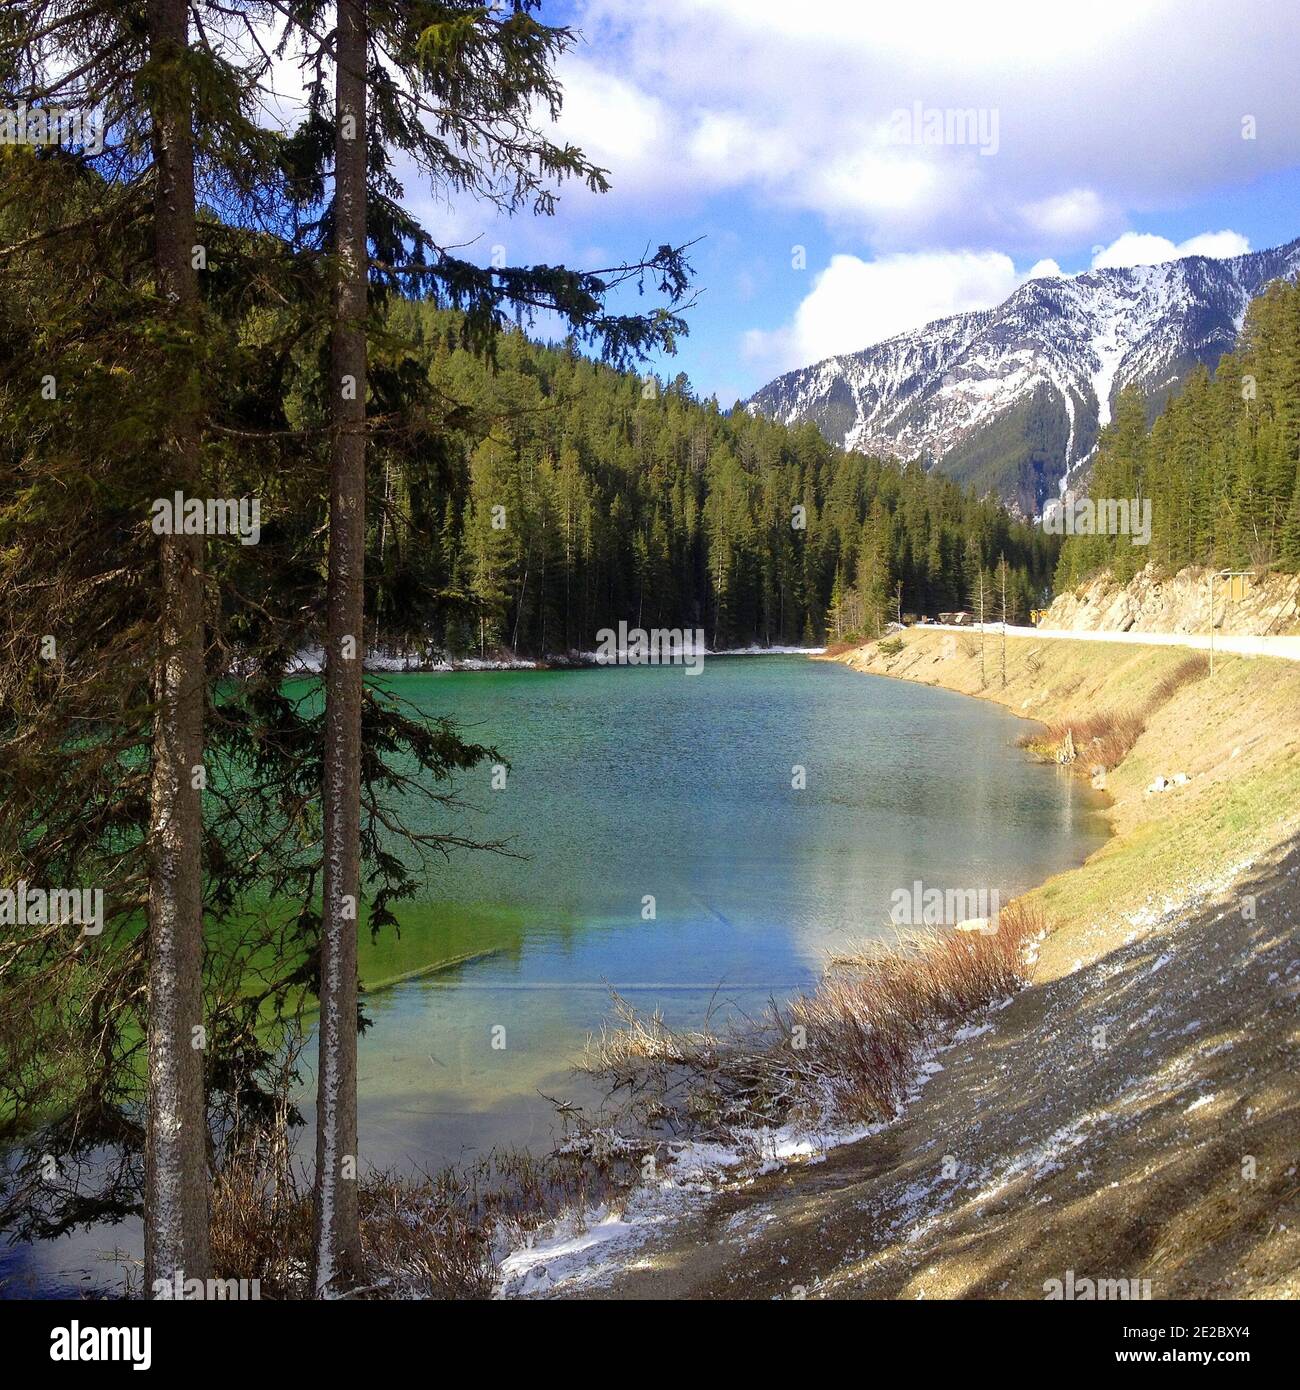 Olive lake in the Rocky Mountains. Kootenay National park. Green forest and lovely green lake, Stock Photo